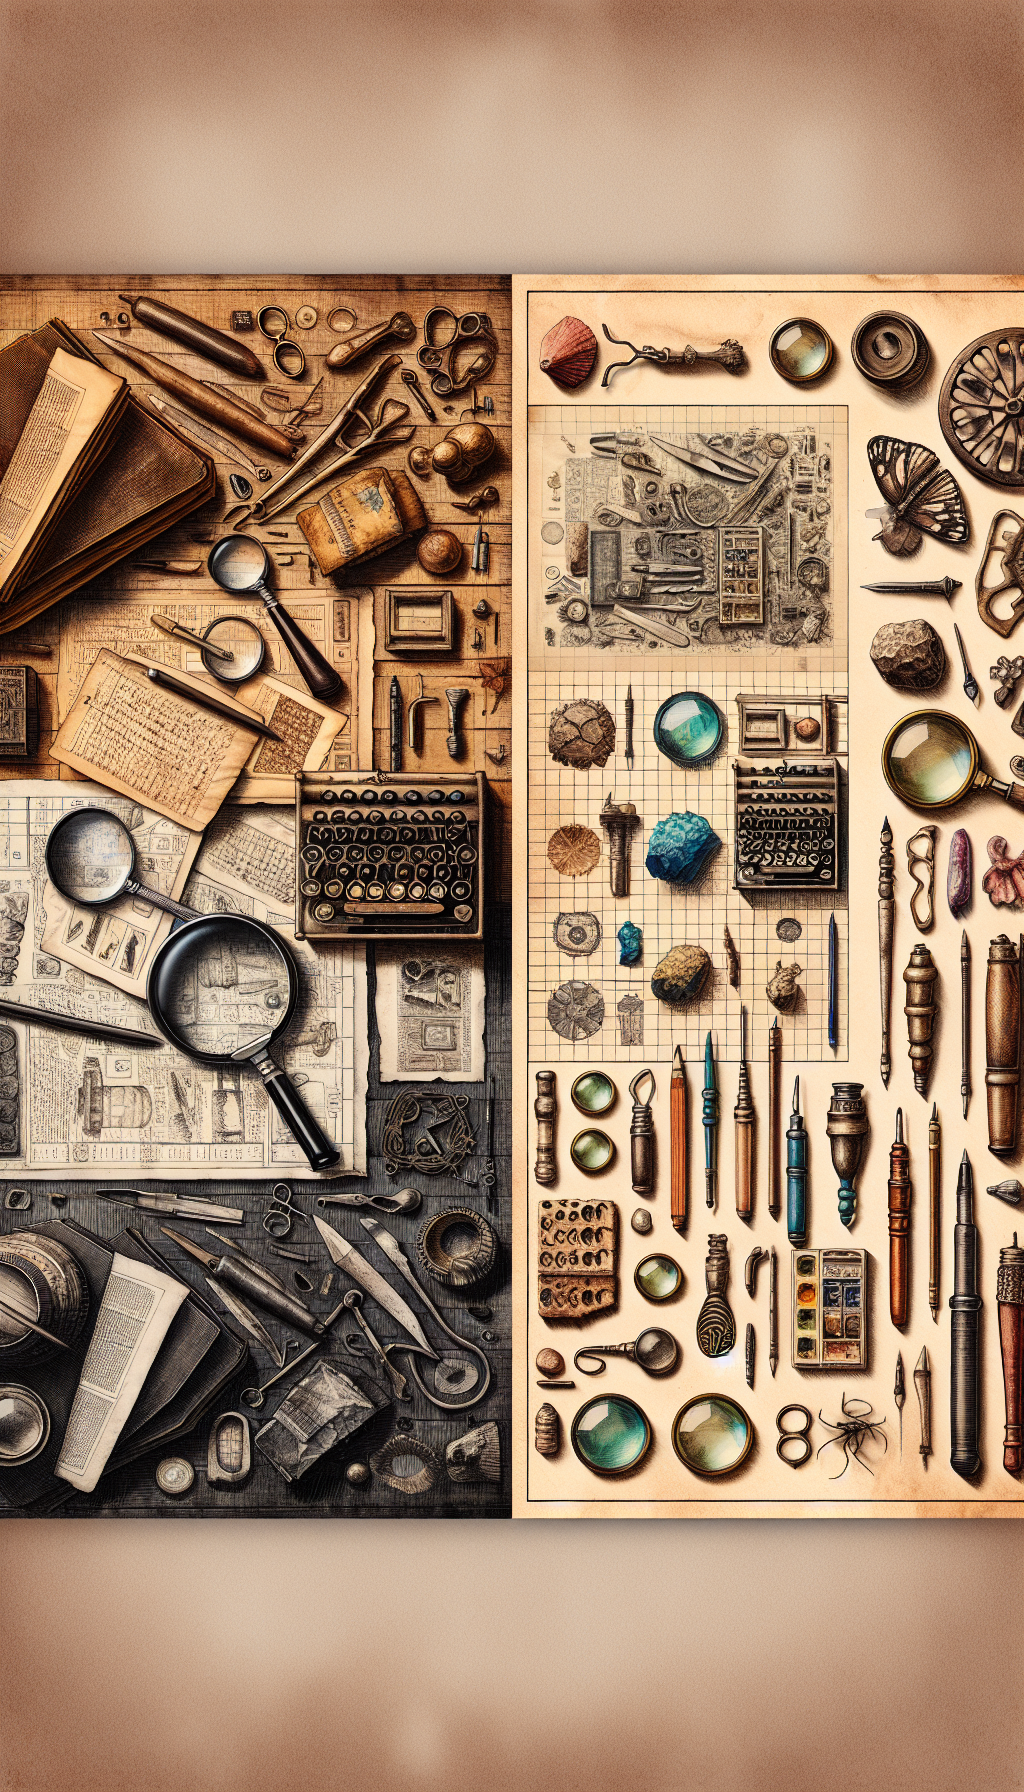 A whimsical collage, half sepia-toned Victorian sketch, half bright watercolor imagery, portrays an archeologist's desk. Vintage magnifying glasses enlarge details on weathered tools scattered amid old manuscripts. Lined and grid paper sections, each with a different tool, suggest a beginner's chart for identification, merging past and present insights into the art of antique tool discovery.